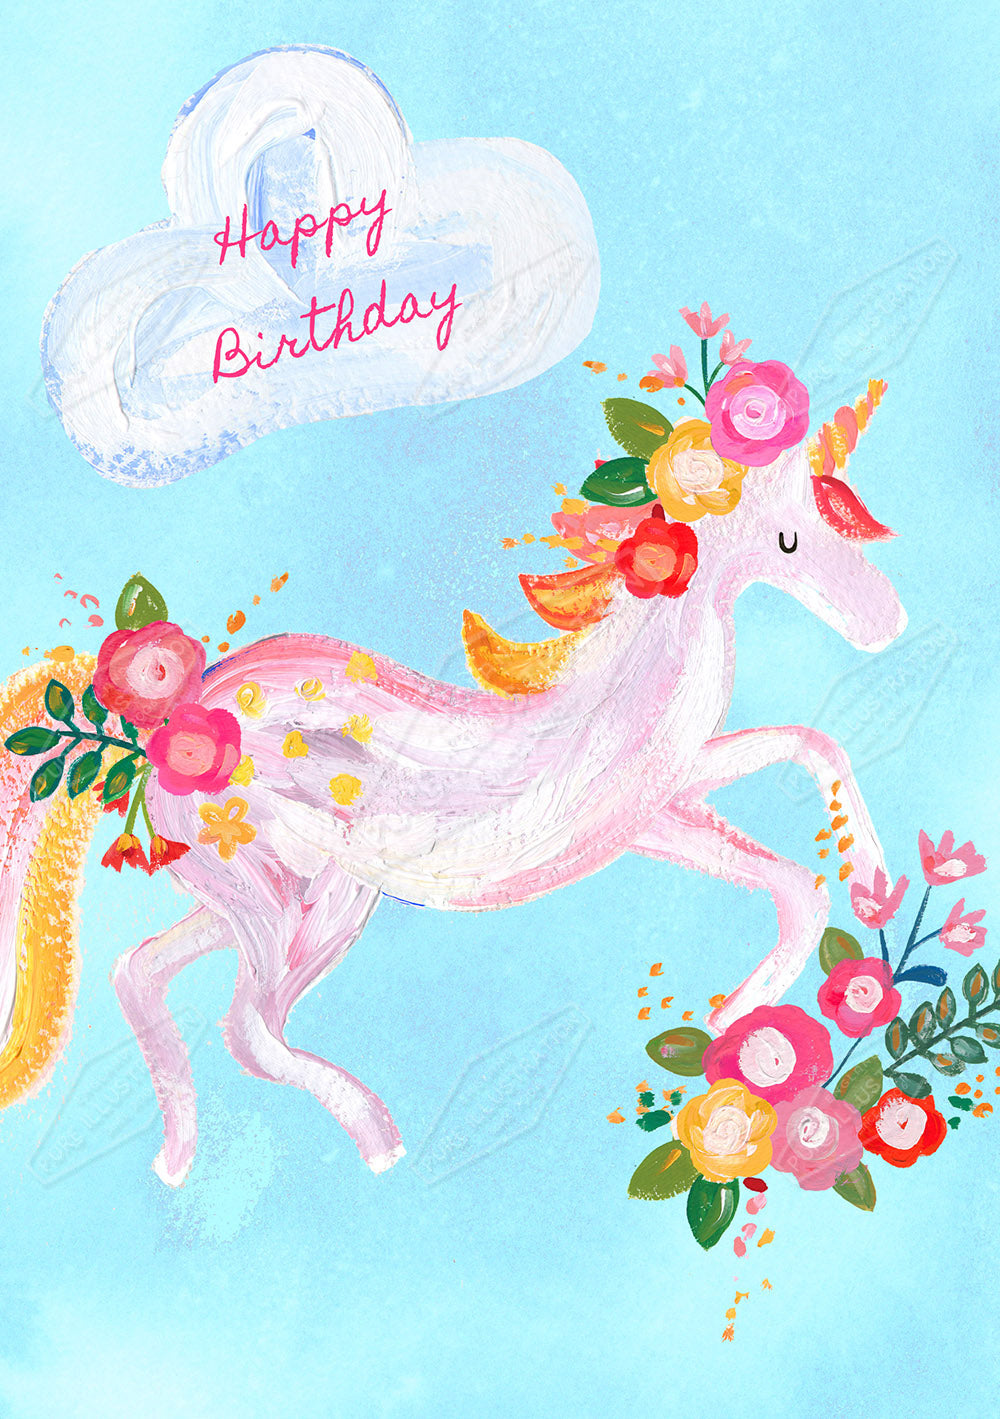 00033184KSP- Kerry Spurling is represented by Pure Art Licensing Agency - Birthday Greeting Card Design